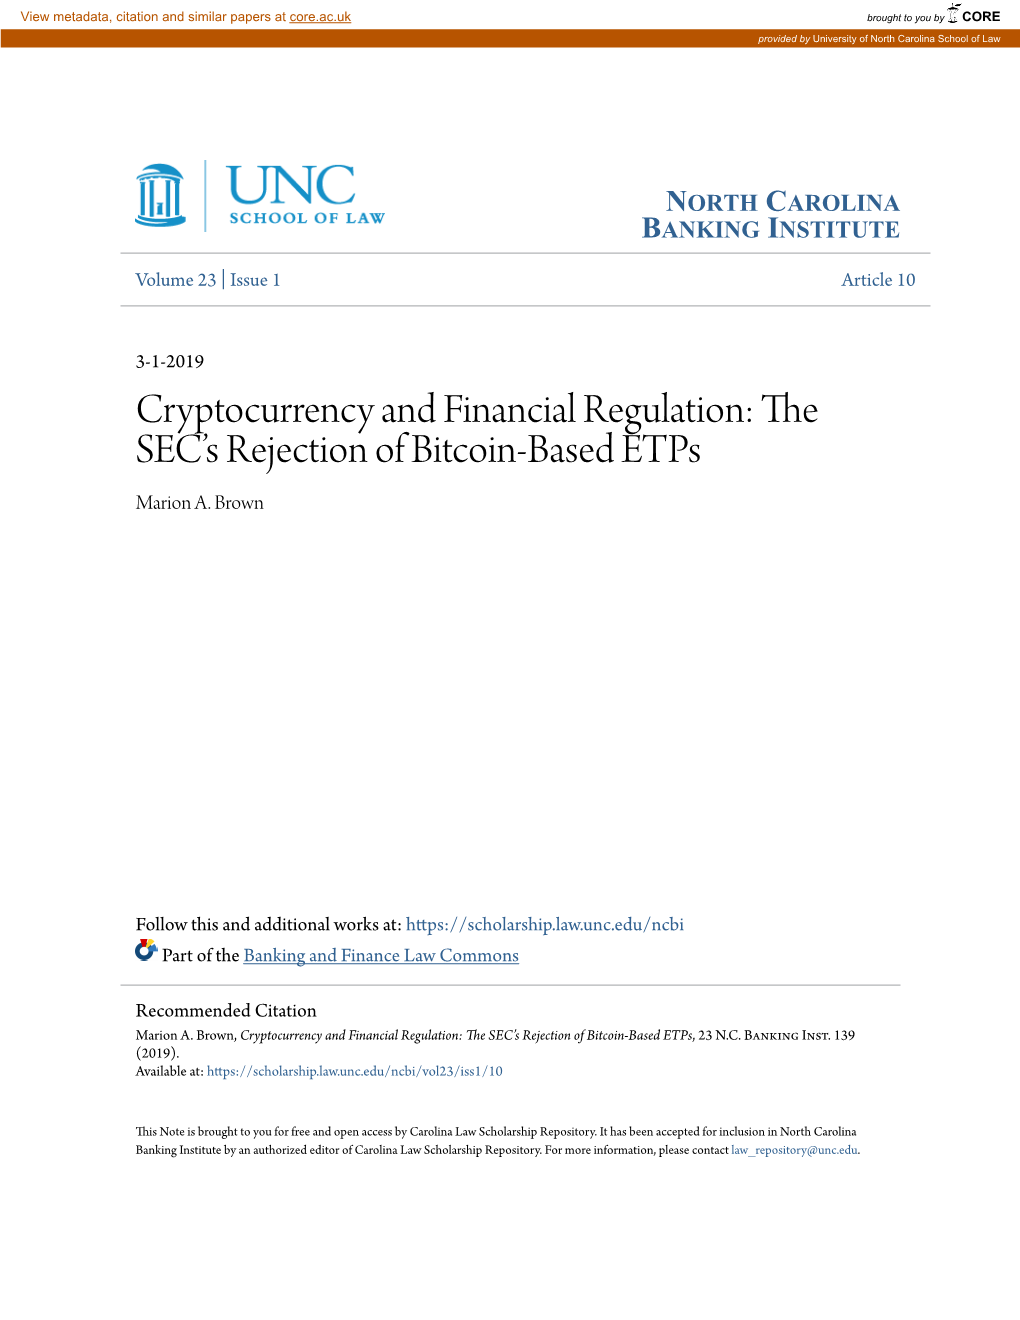 Cryptocurrency and Financial Regulation: the SEC’S Rejection of Bitcoin-Based Etps Marion A